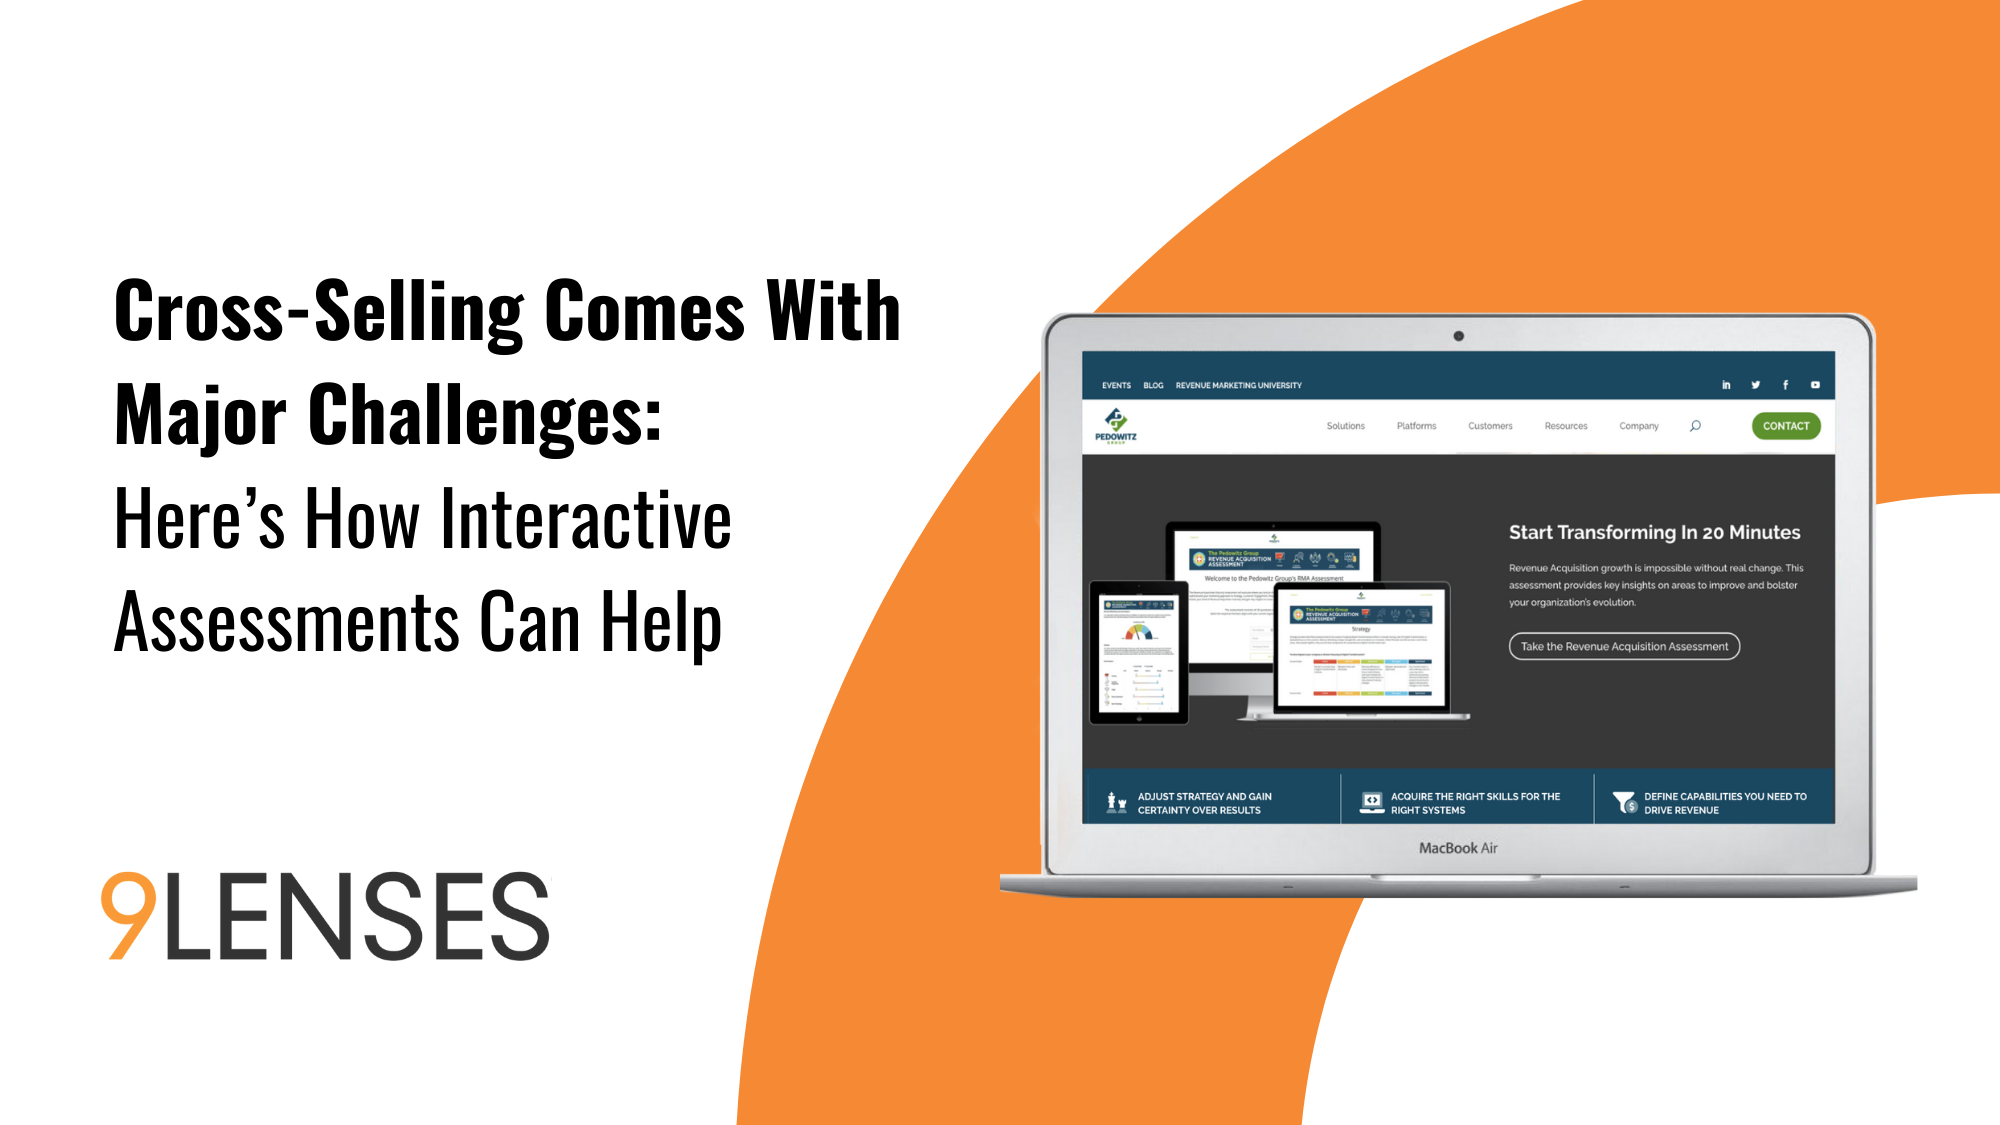 Cross-Selling Comes With Major Challenges: Here’s How Interactive Assessments Can Help